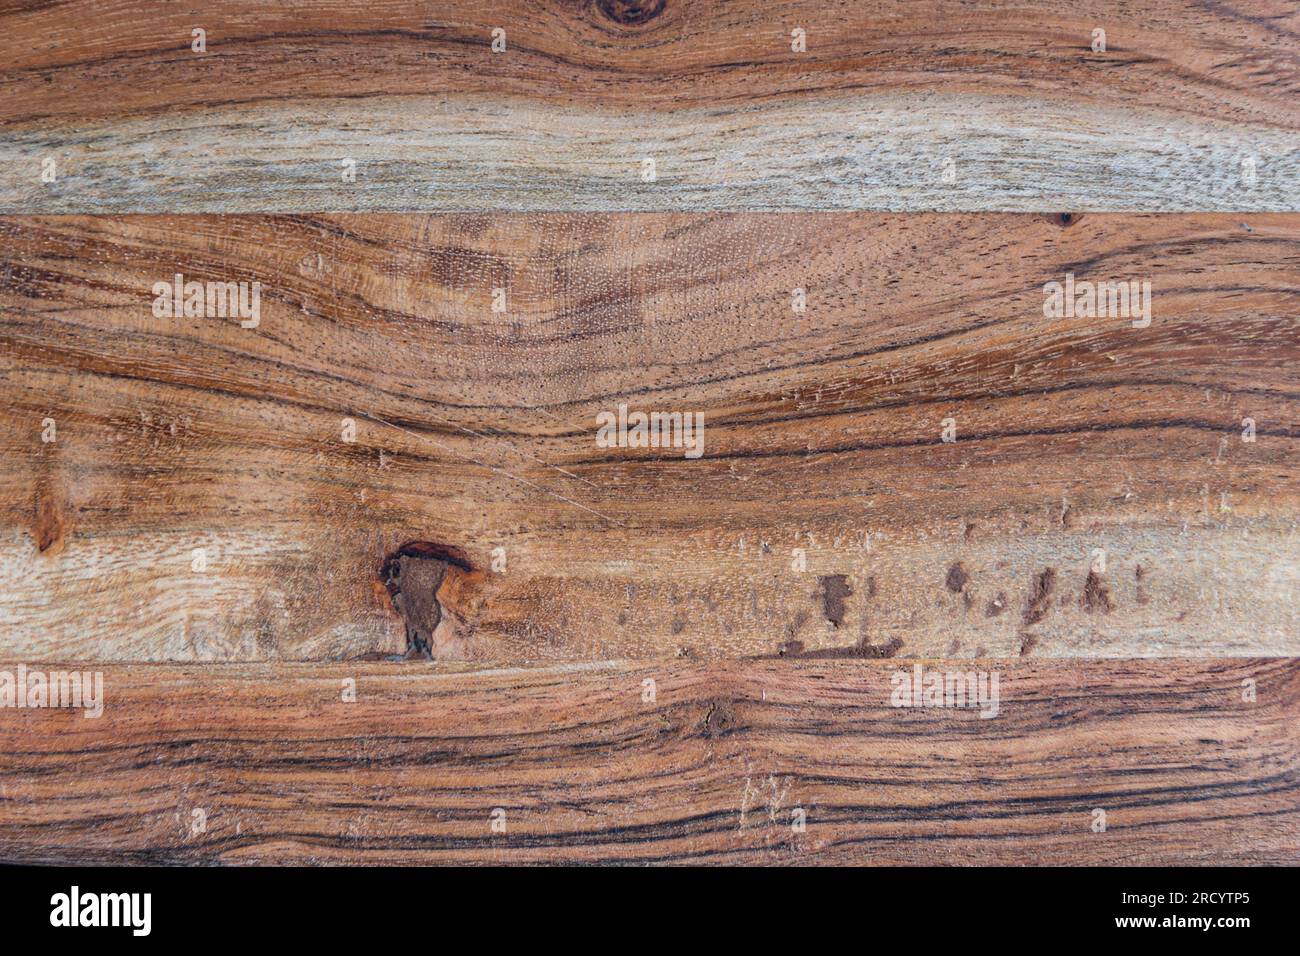 Texture of a cutting wooden board. hard transitions, saw cuts of knots. close up Stock Photo